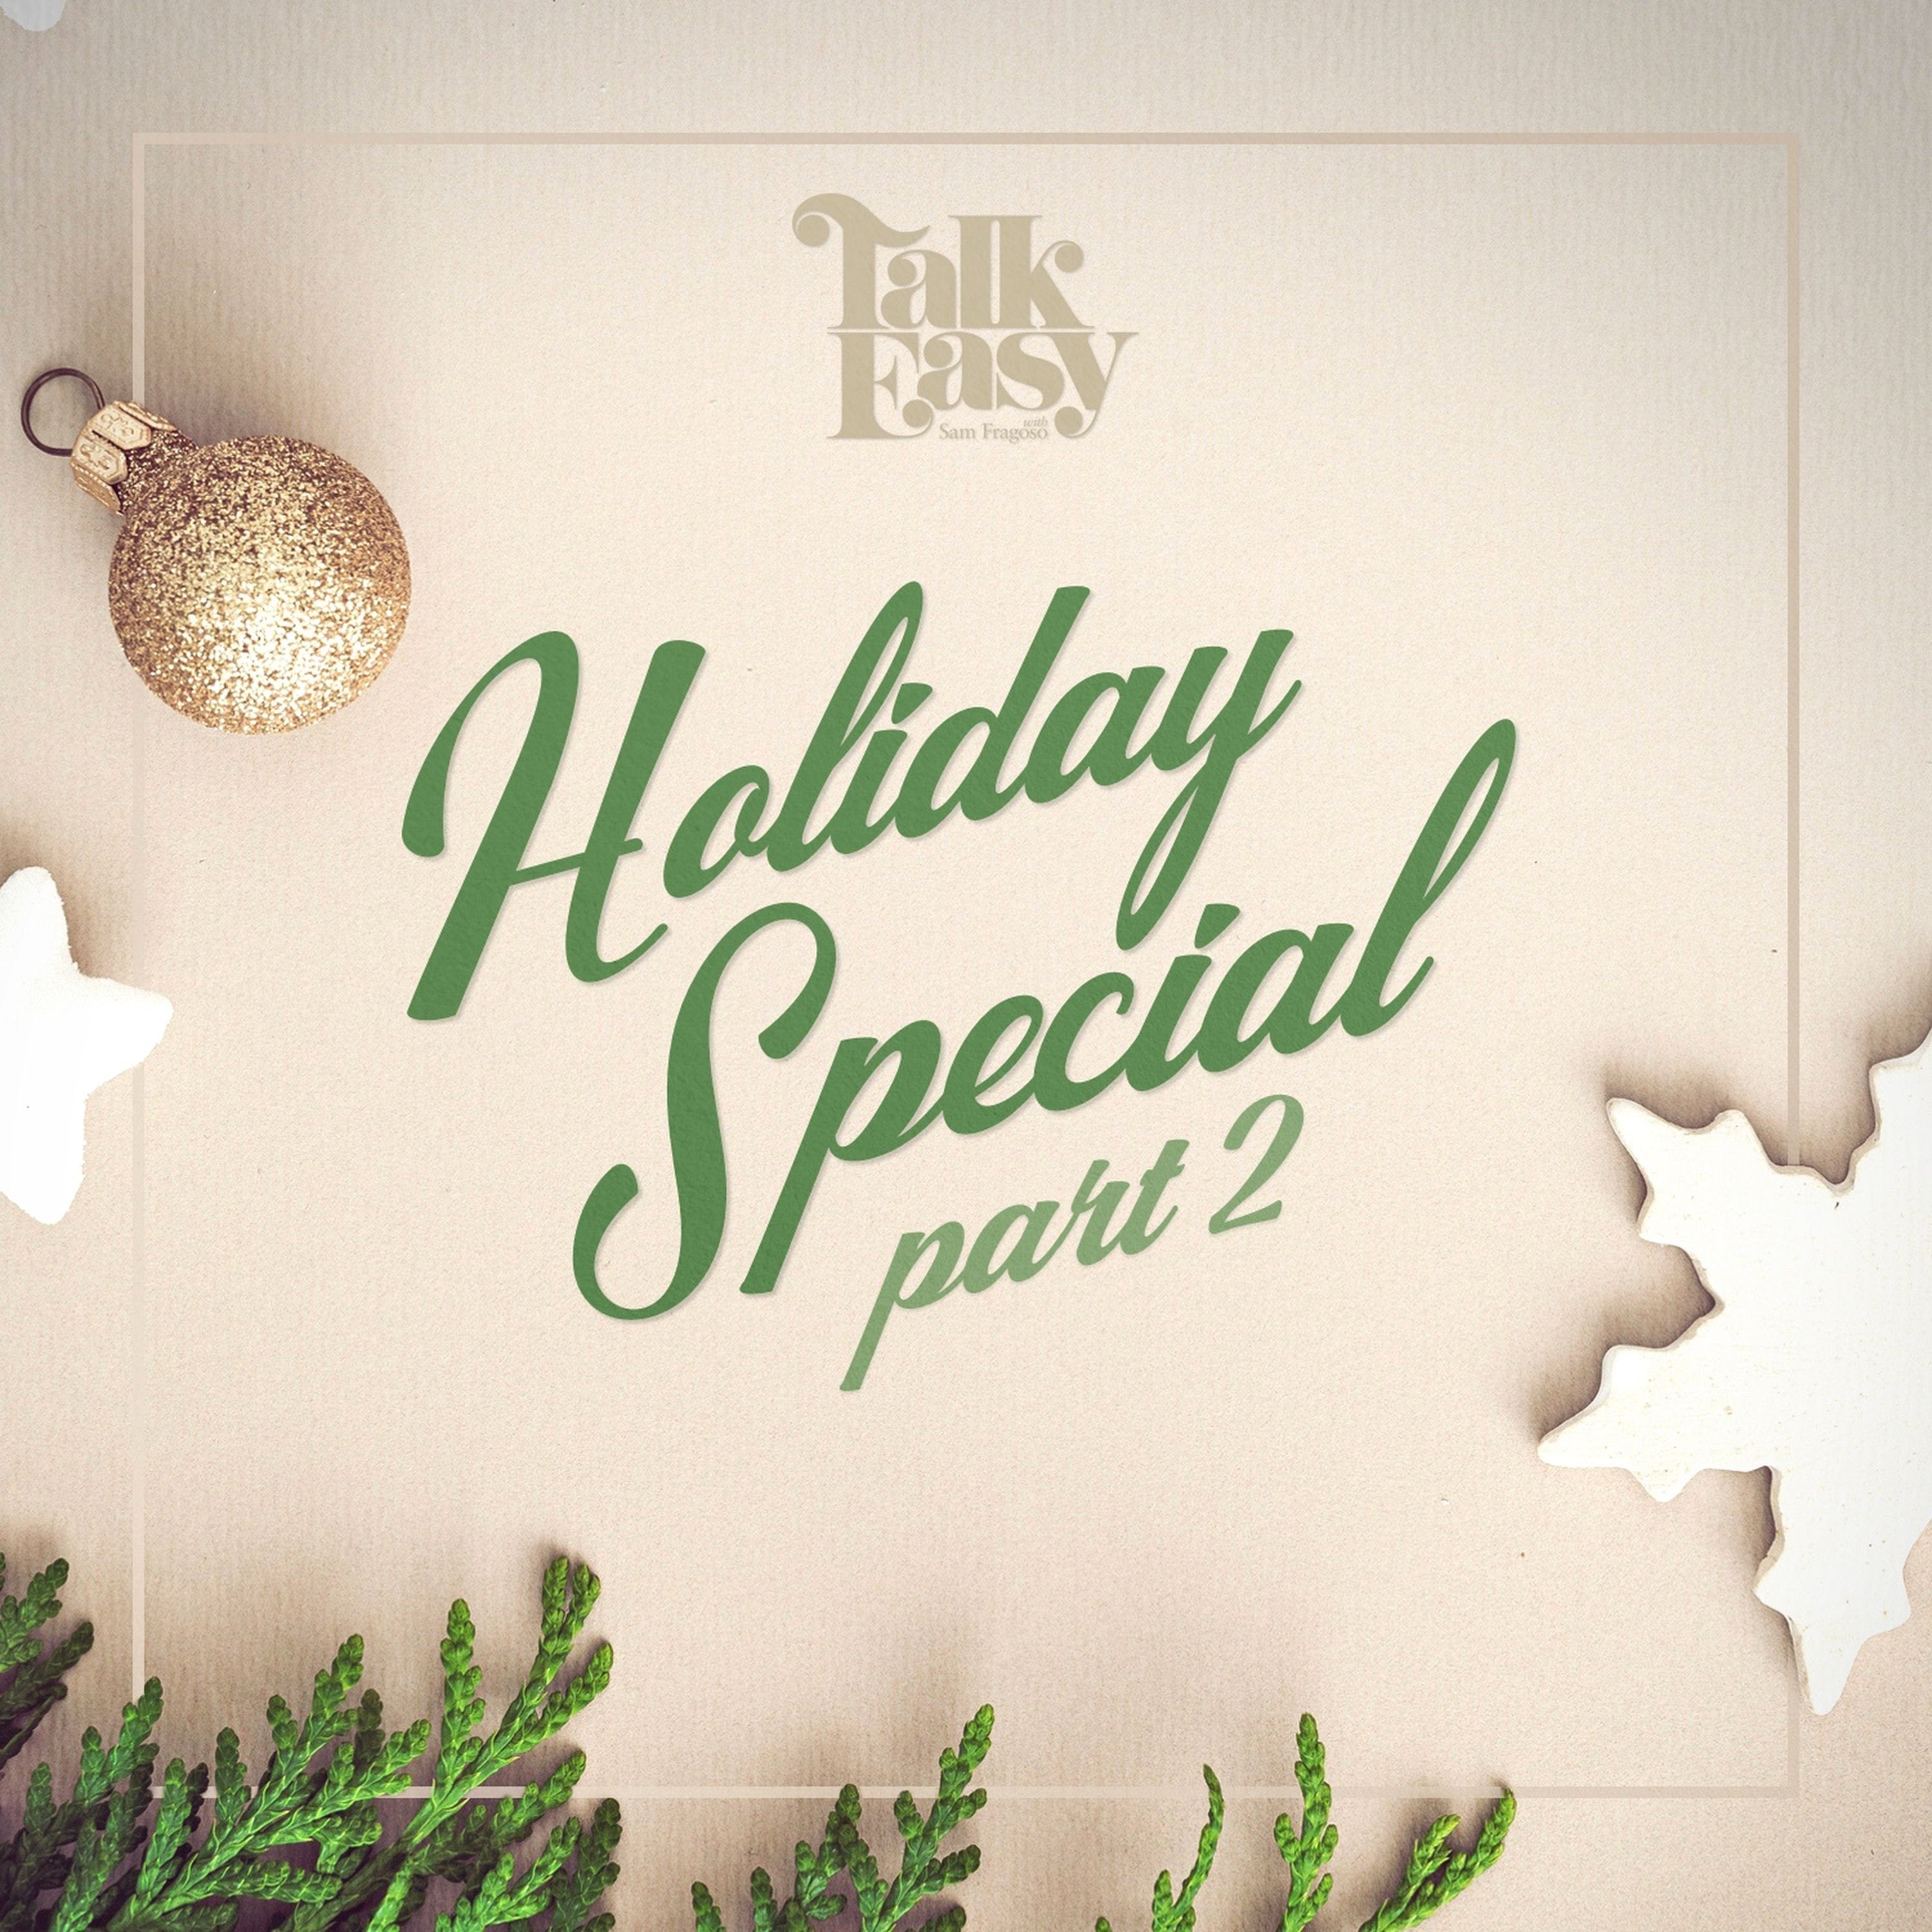 A Talk Easy Holiday Special: Goodbye 2020